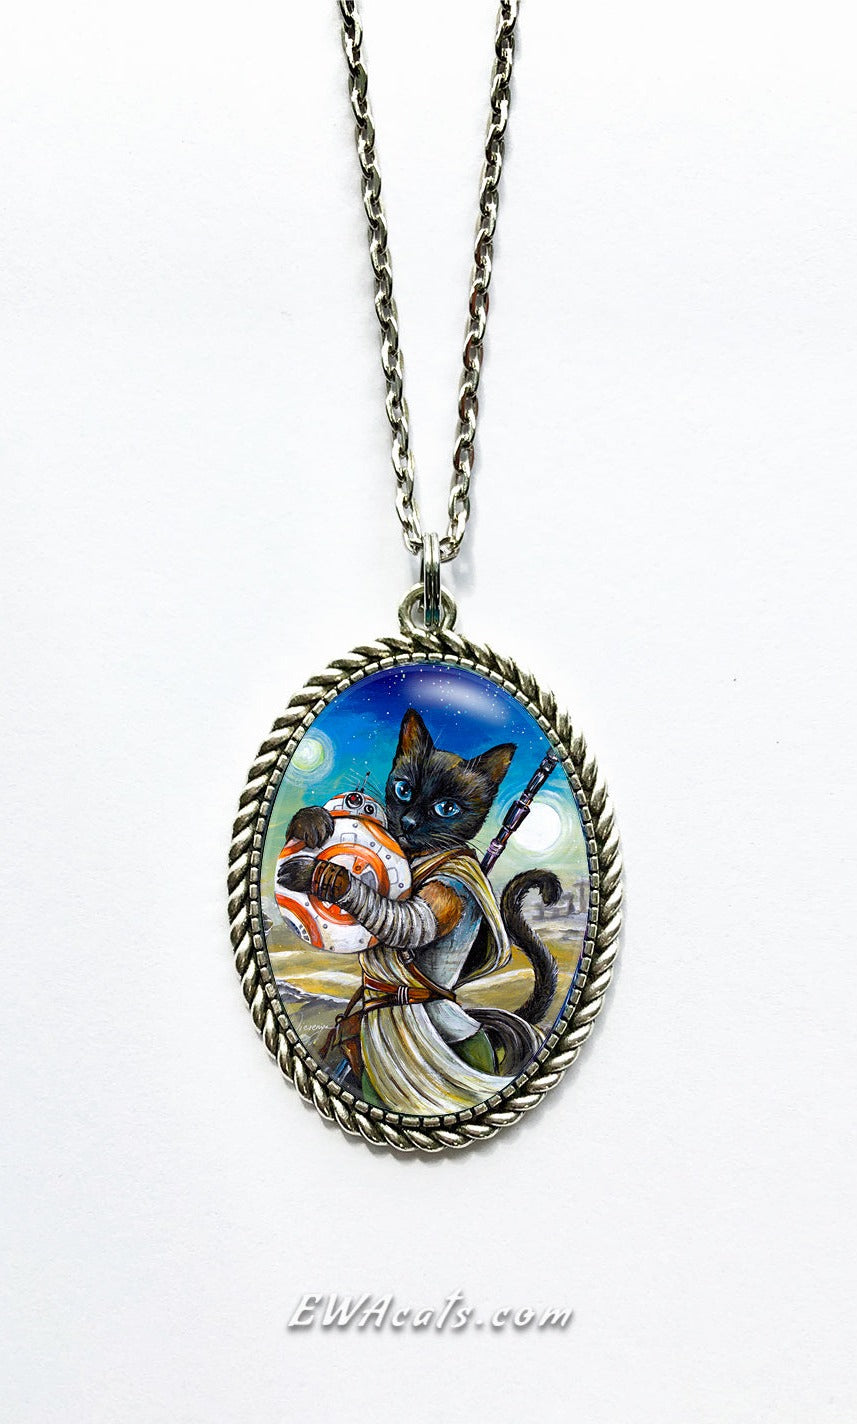 Necklace "Ray Cat"